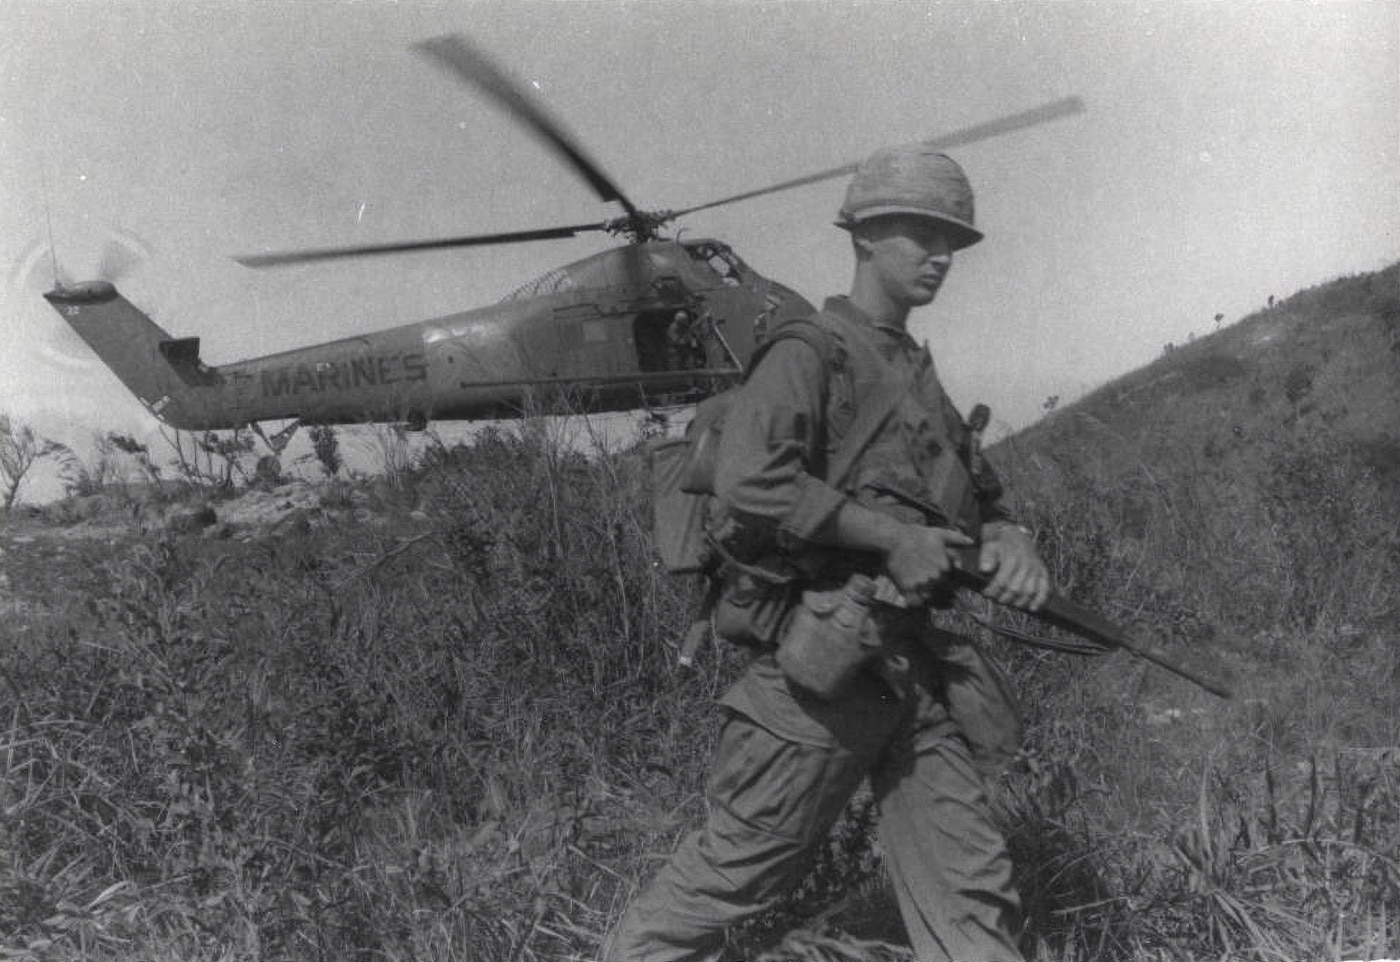 In this image, we see a Marine equipped with a M16 rifle, helmet, canteen, backpack and utility uniform walking down a grassy hill and away from the helicopter that transported him there. The image highlights the helicopter role in modern warfare — something that started in the Vietnam era circa 1962. Choctaws like this one had tail-dragger rear fuselage and landing gear. The utility helicopter was adopted by many allied militaries around the world including the French Air Force and German Air Force.